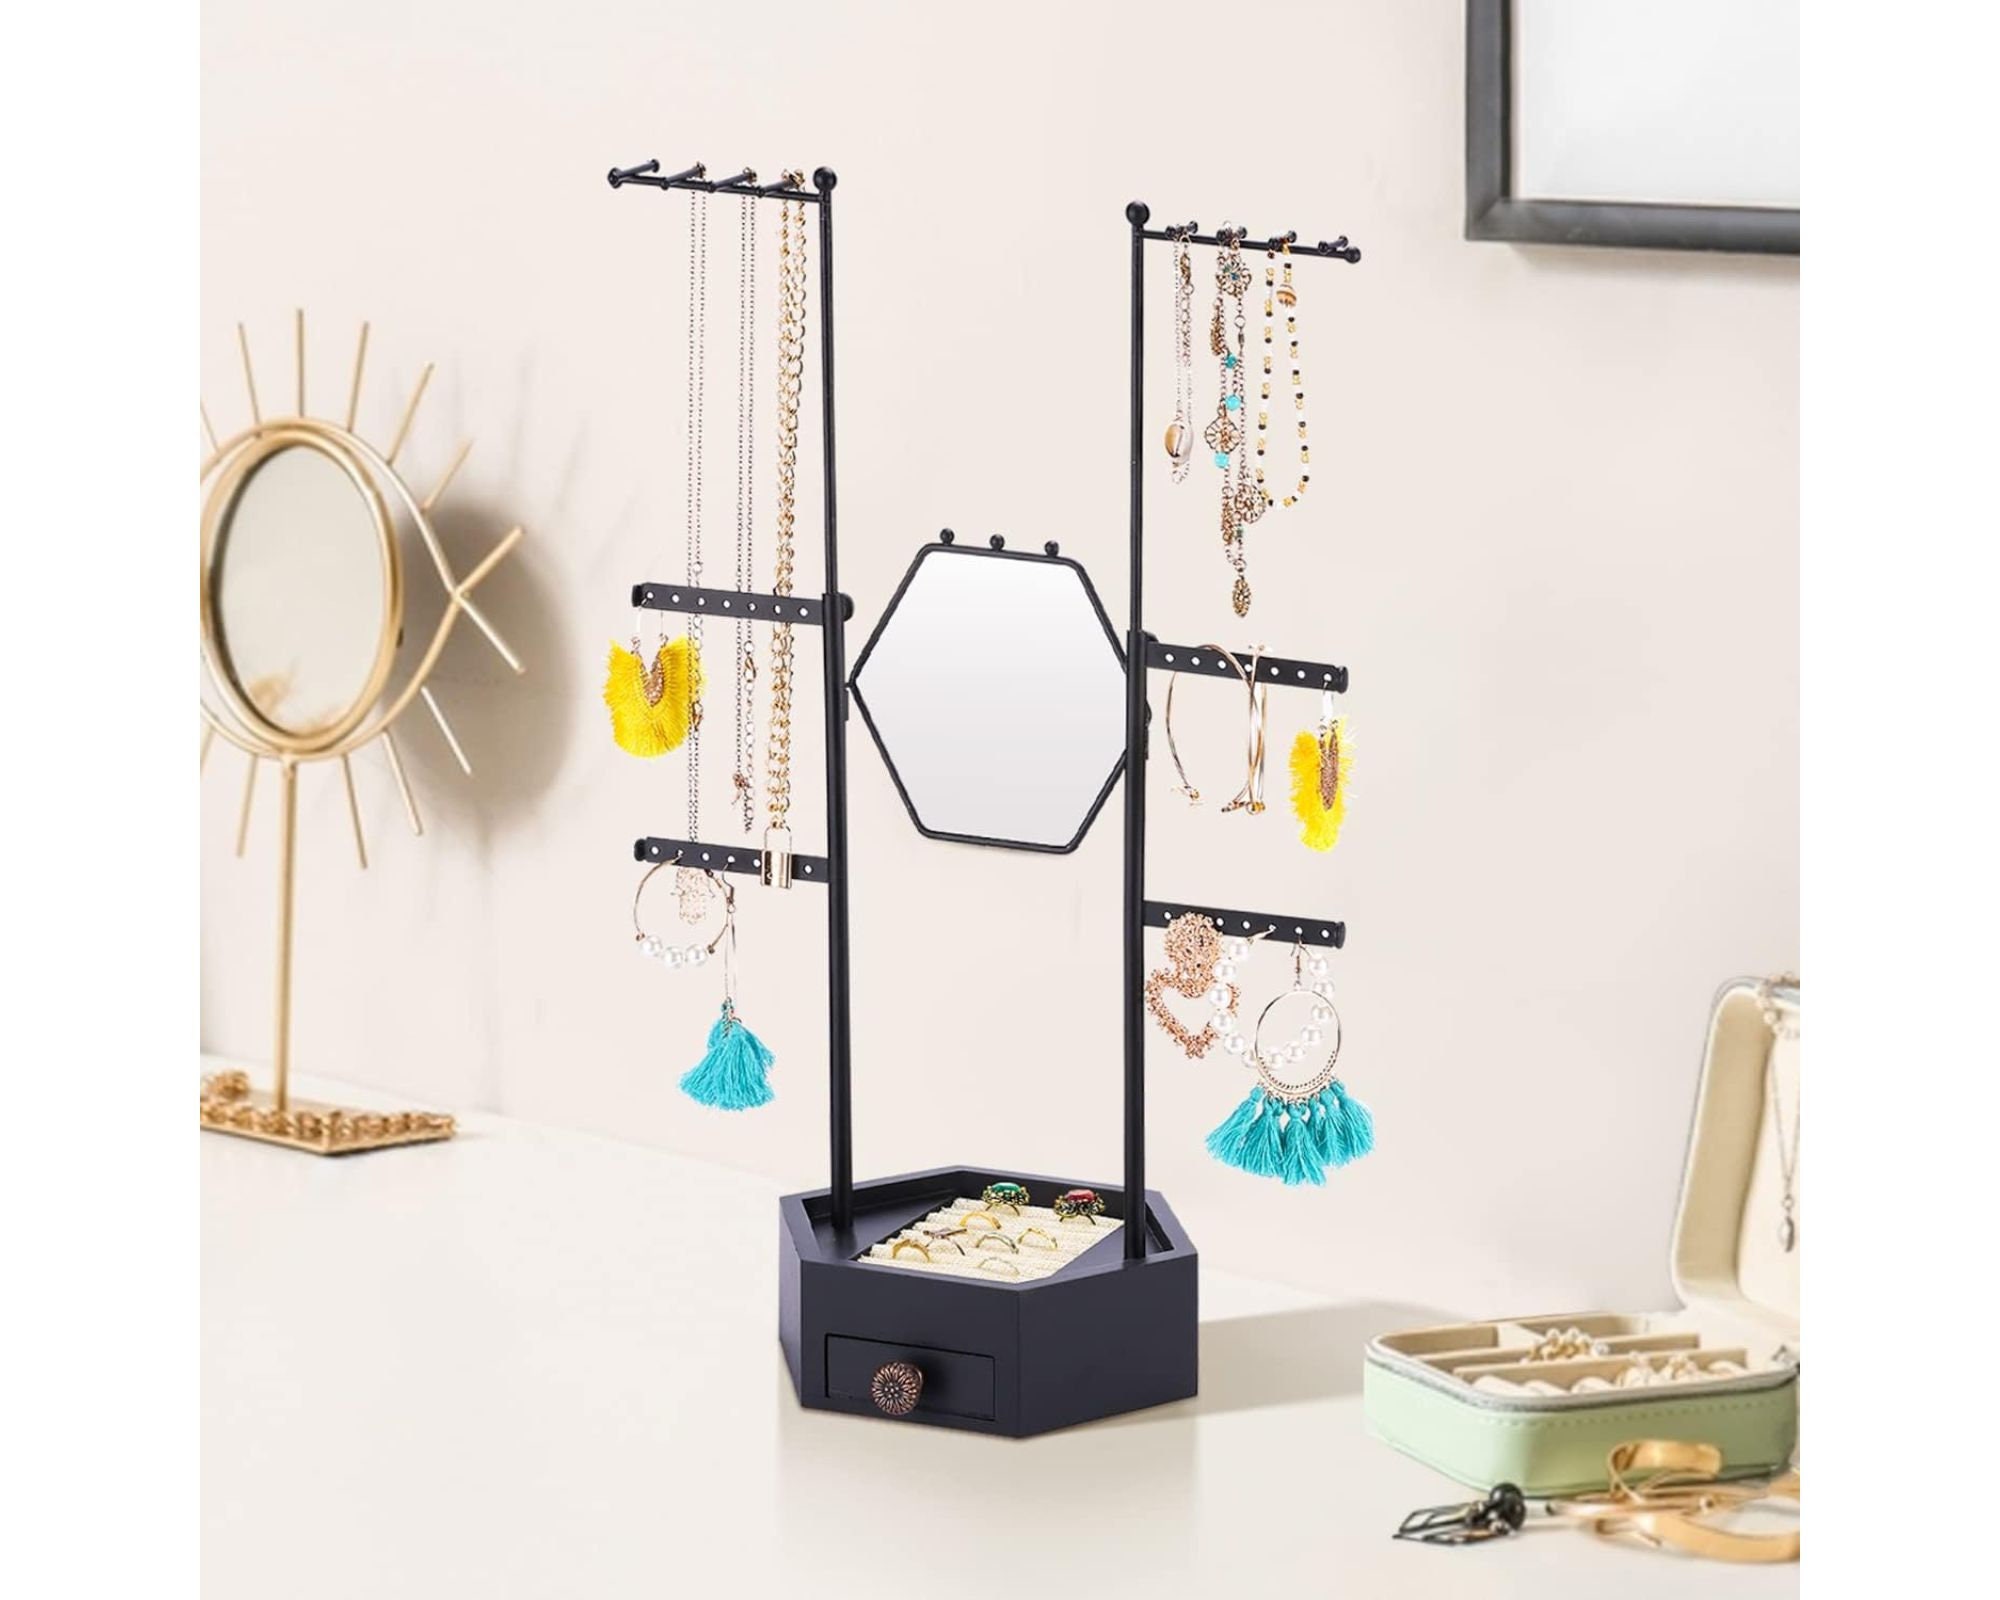 3.9 Earring Cards Free Standing Tent Combo Necklace Display Cards Logo  Jewelry Stand Display Packaging ECONOMY 